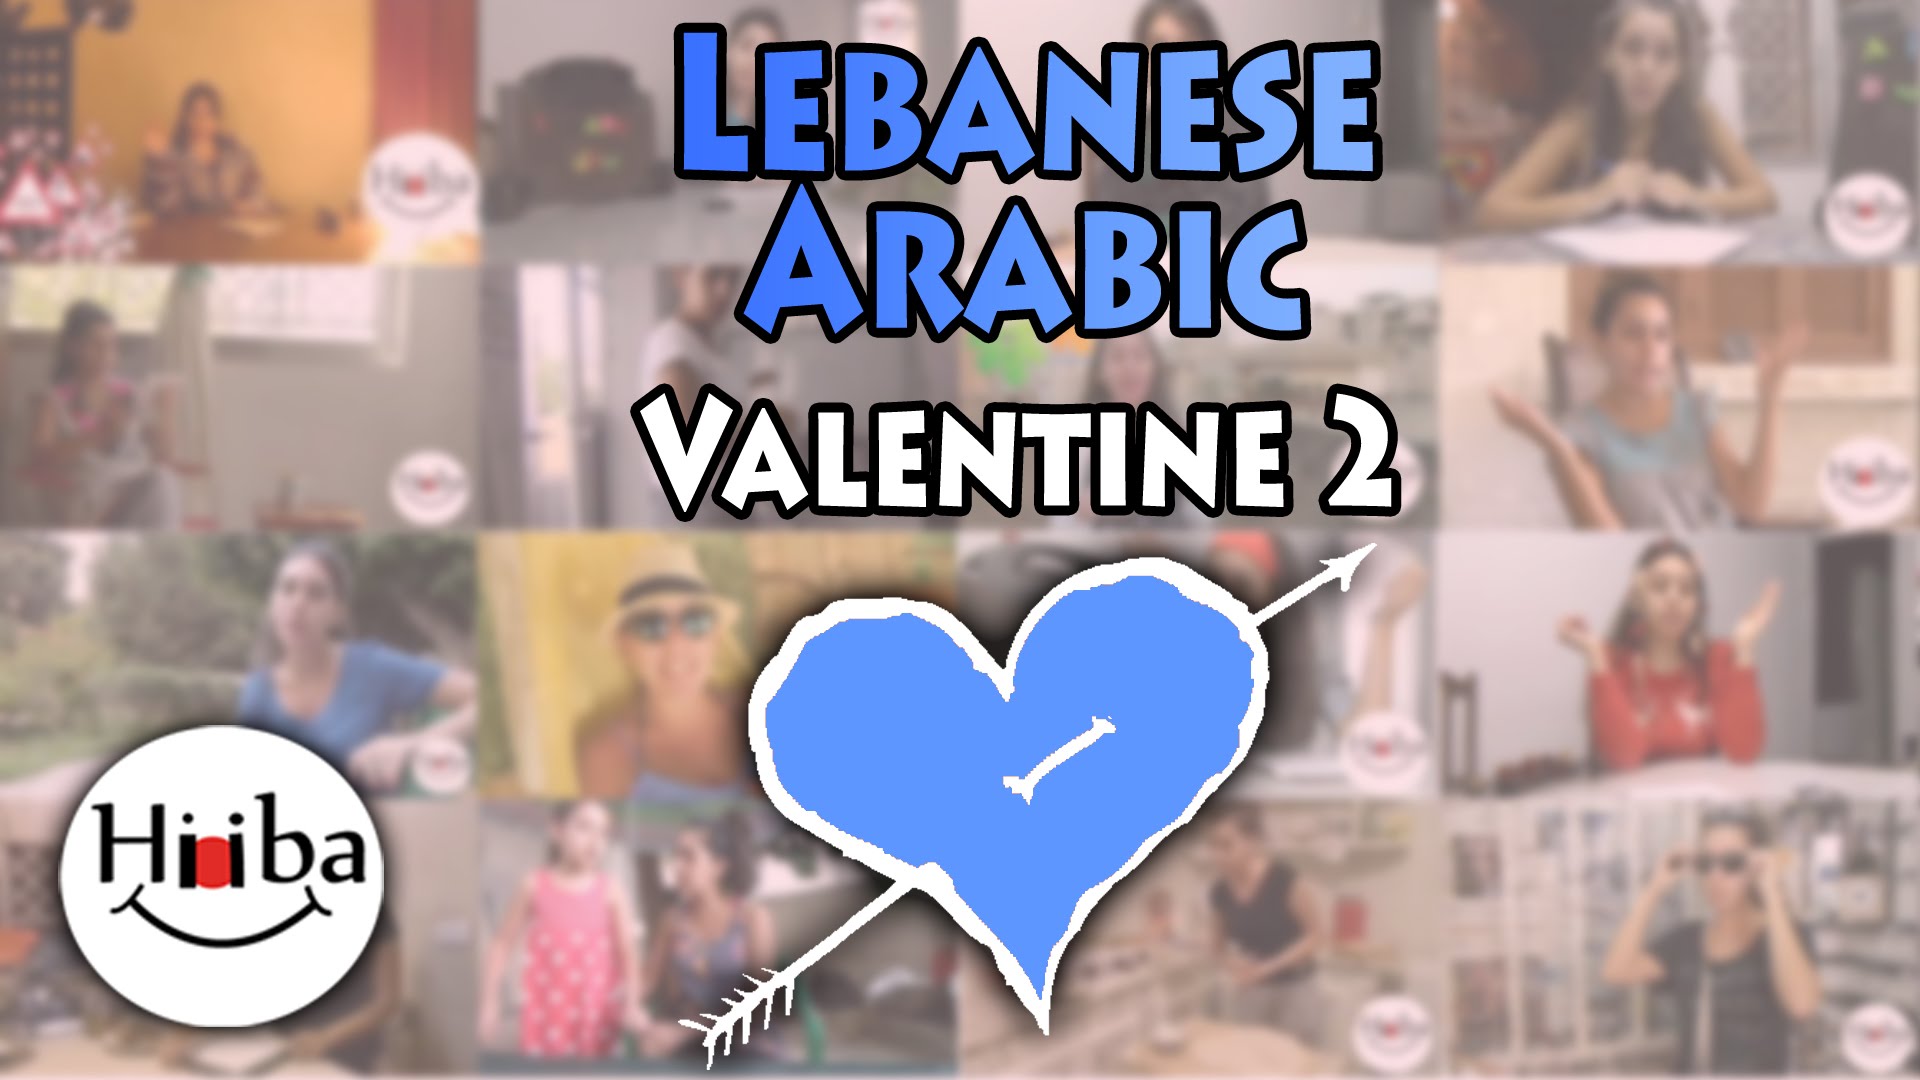 This is the thumbnail of the Lebanese Valentine Lesson number 2. It also contains a blue heart with an arrow going through it